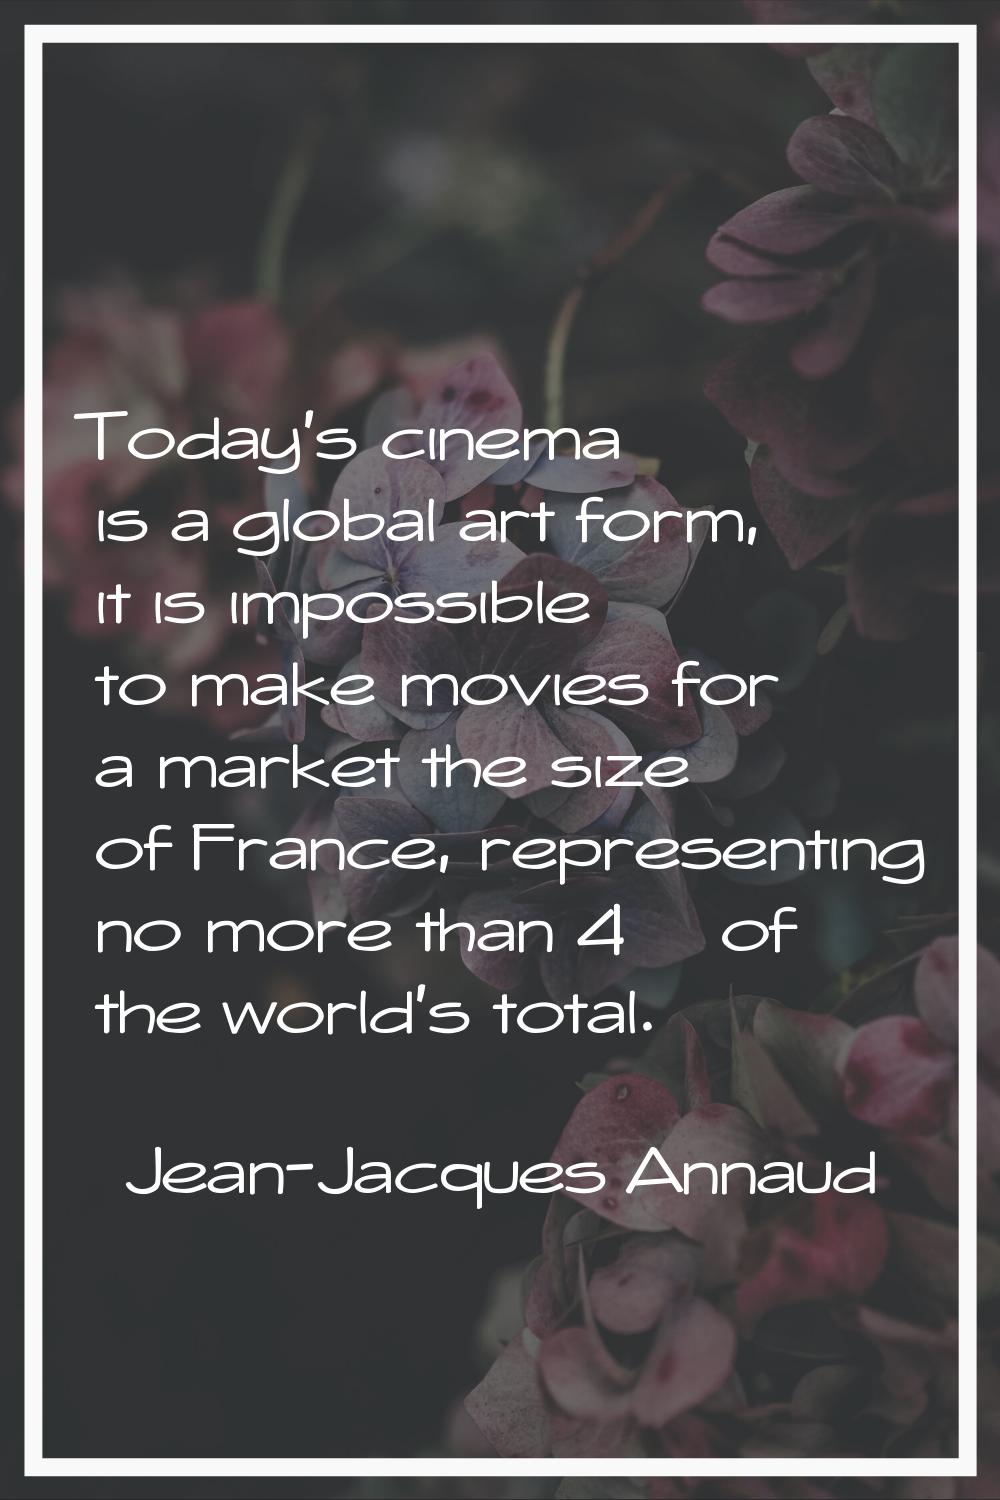 Today's cinema is a global art form, it is impossible to make movies for a market the size of Franc